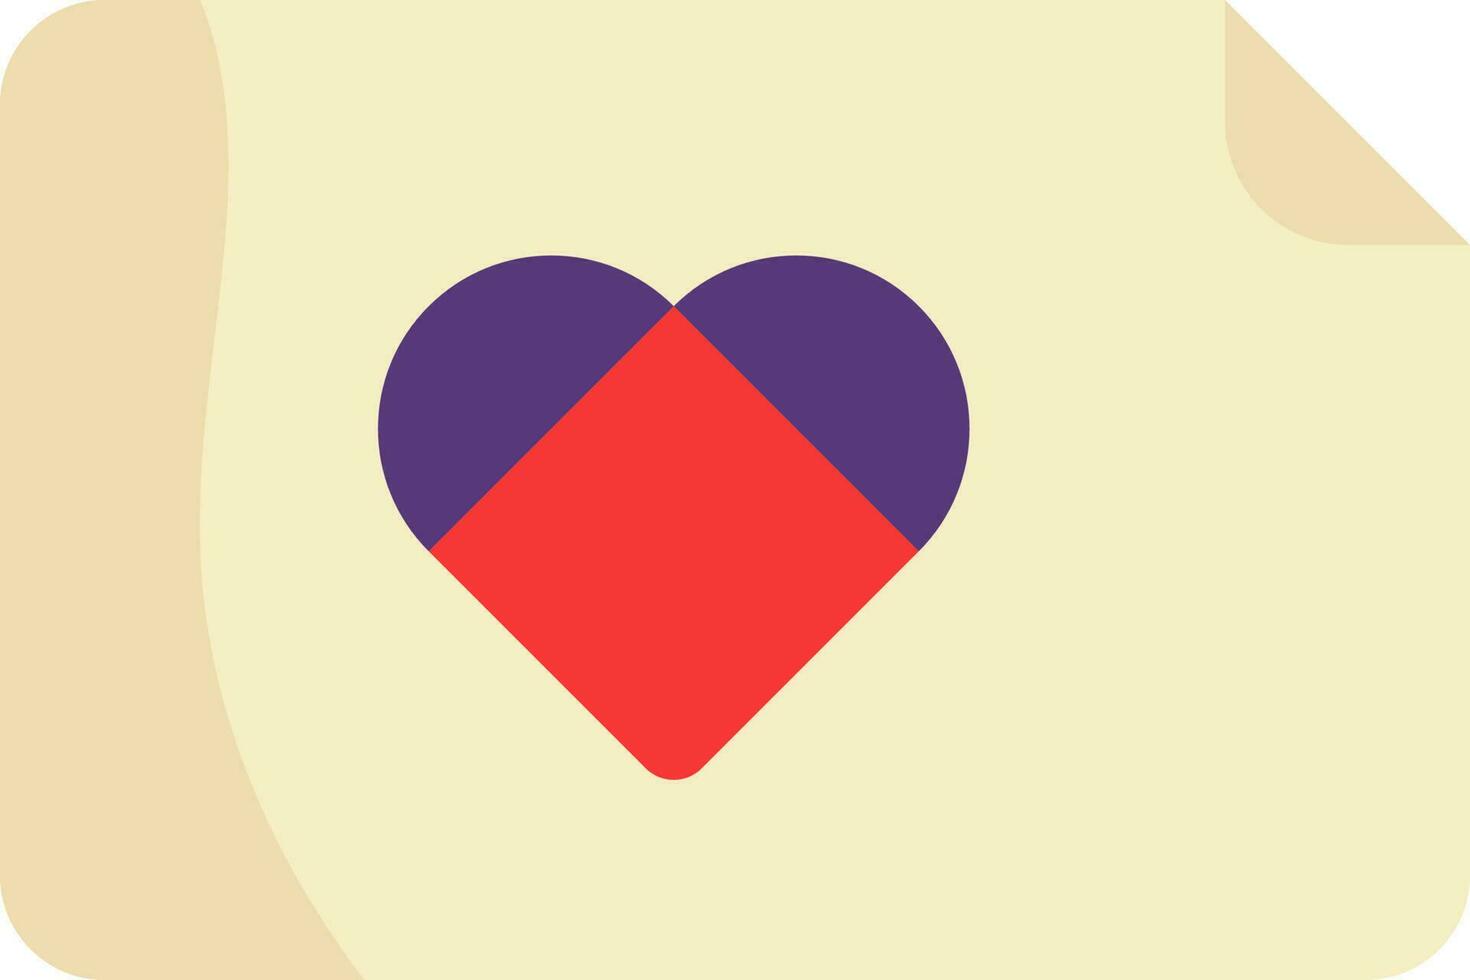 Red And Purple Rhombus Style Heart Shape Designing File Icon. vector